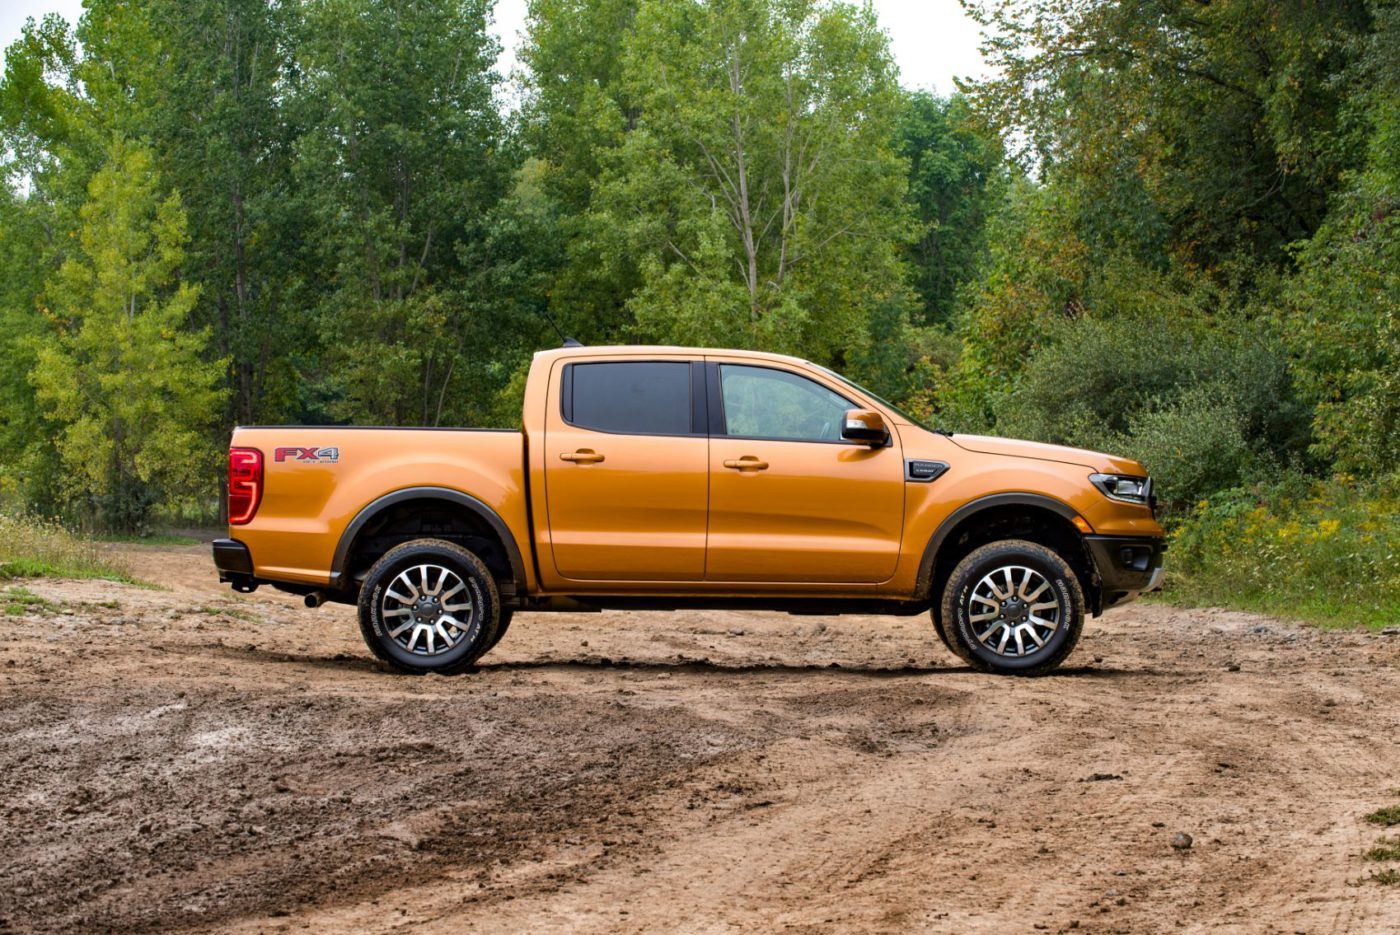 2020 Ford Ranger Lariat Review: A Middle of The Road Midsize Truck